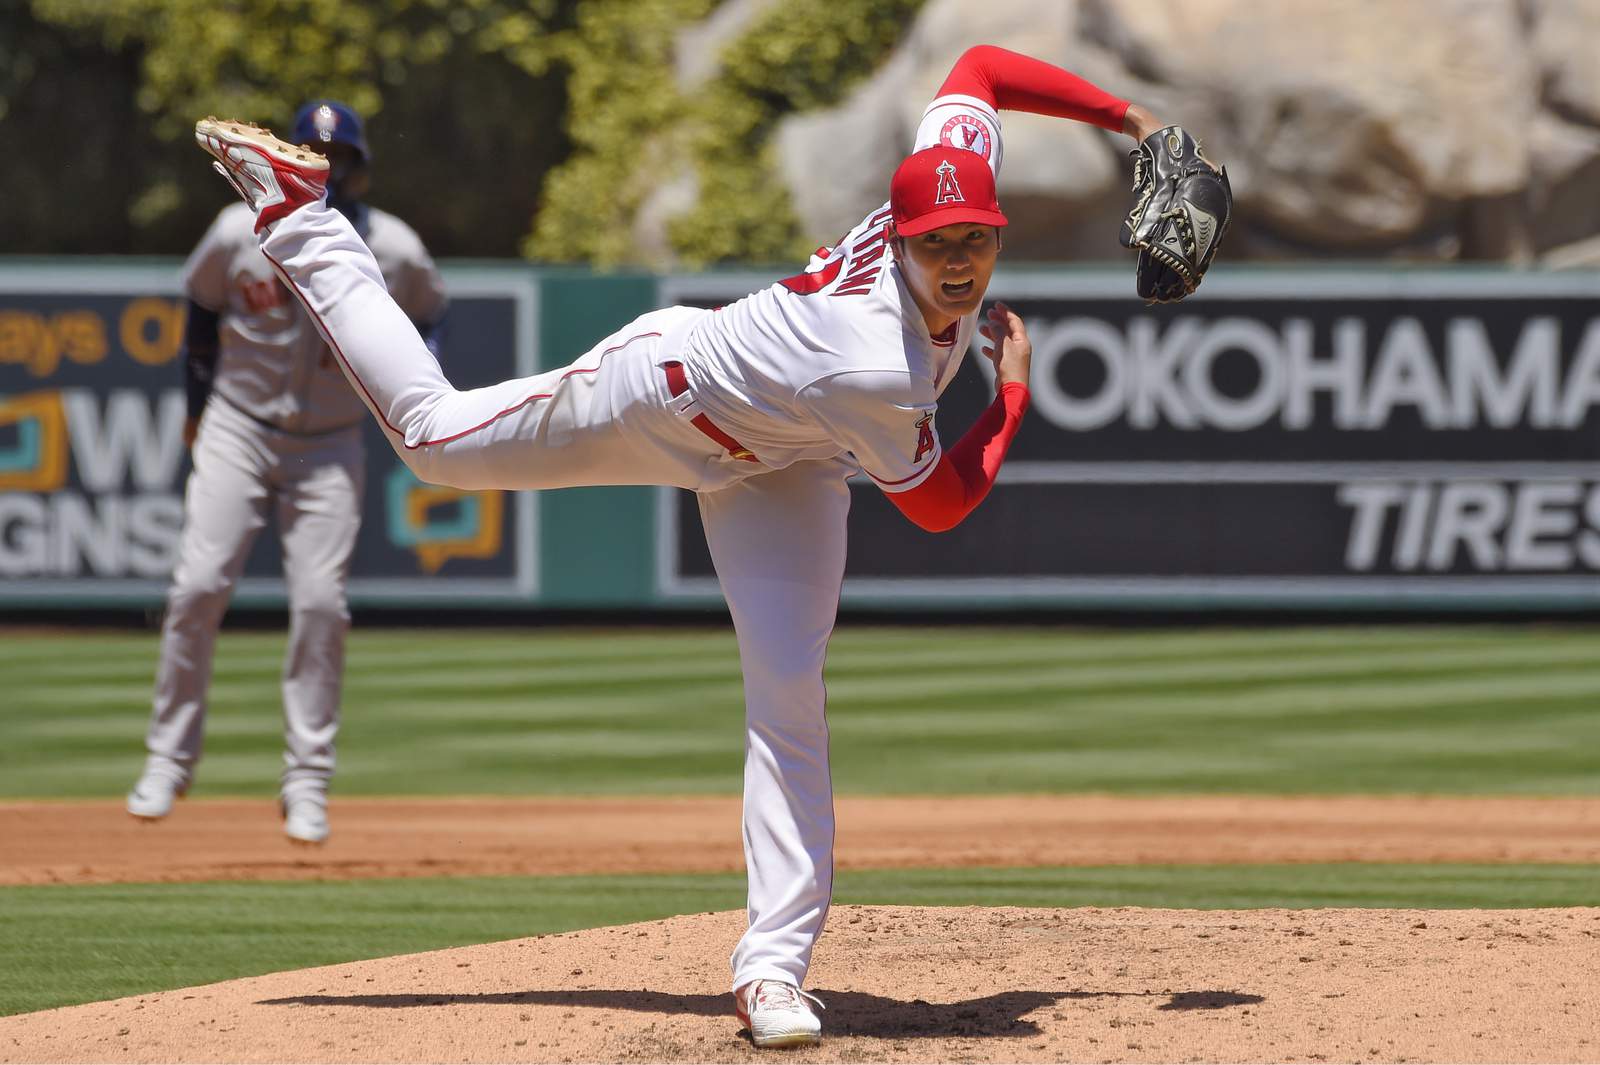 Maddon: Shohei Ohtani won't pitch again for Angels this year